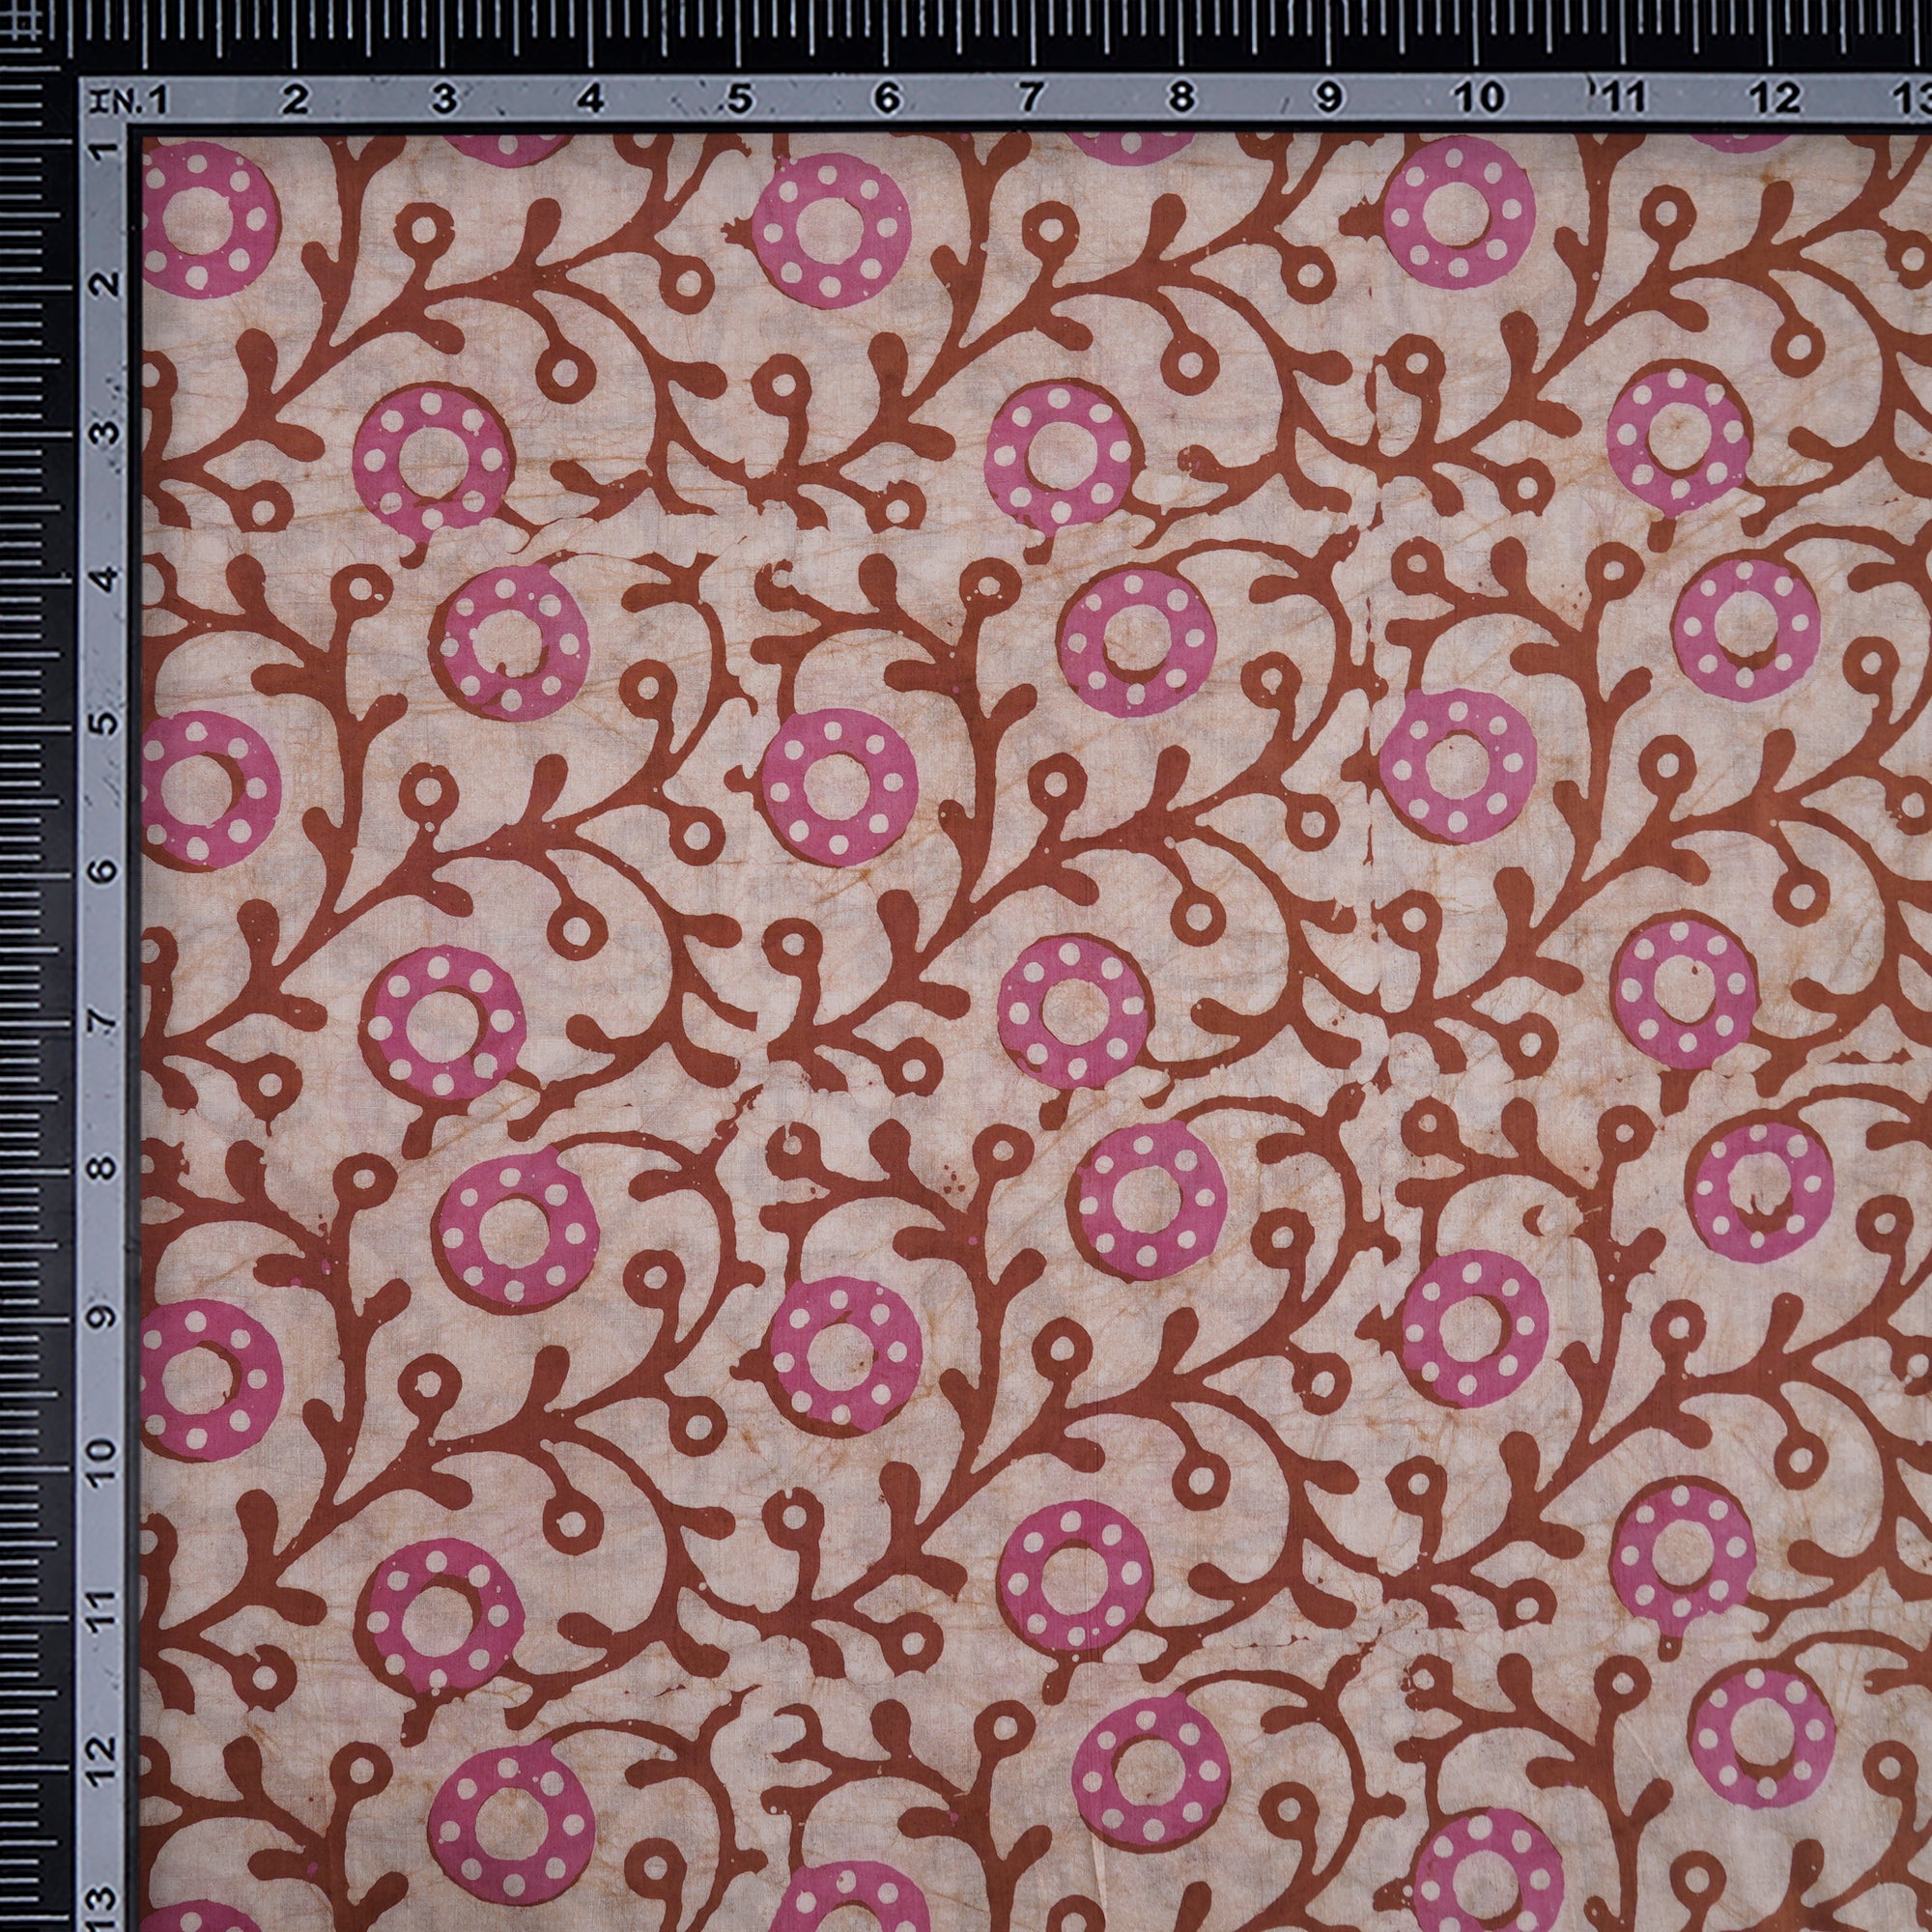 Beige Handcrafted Waxed Batik Printed Cotton Fabric